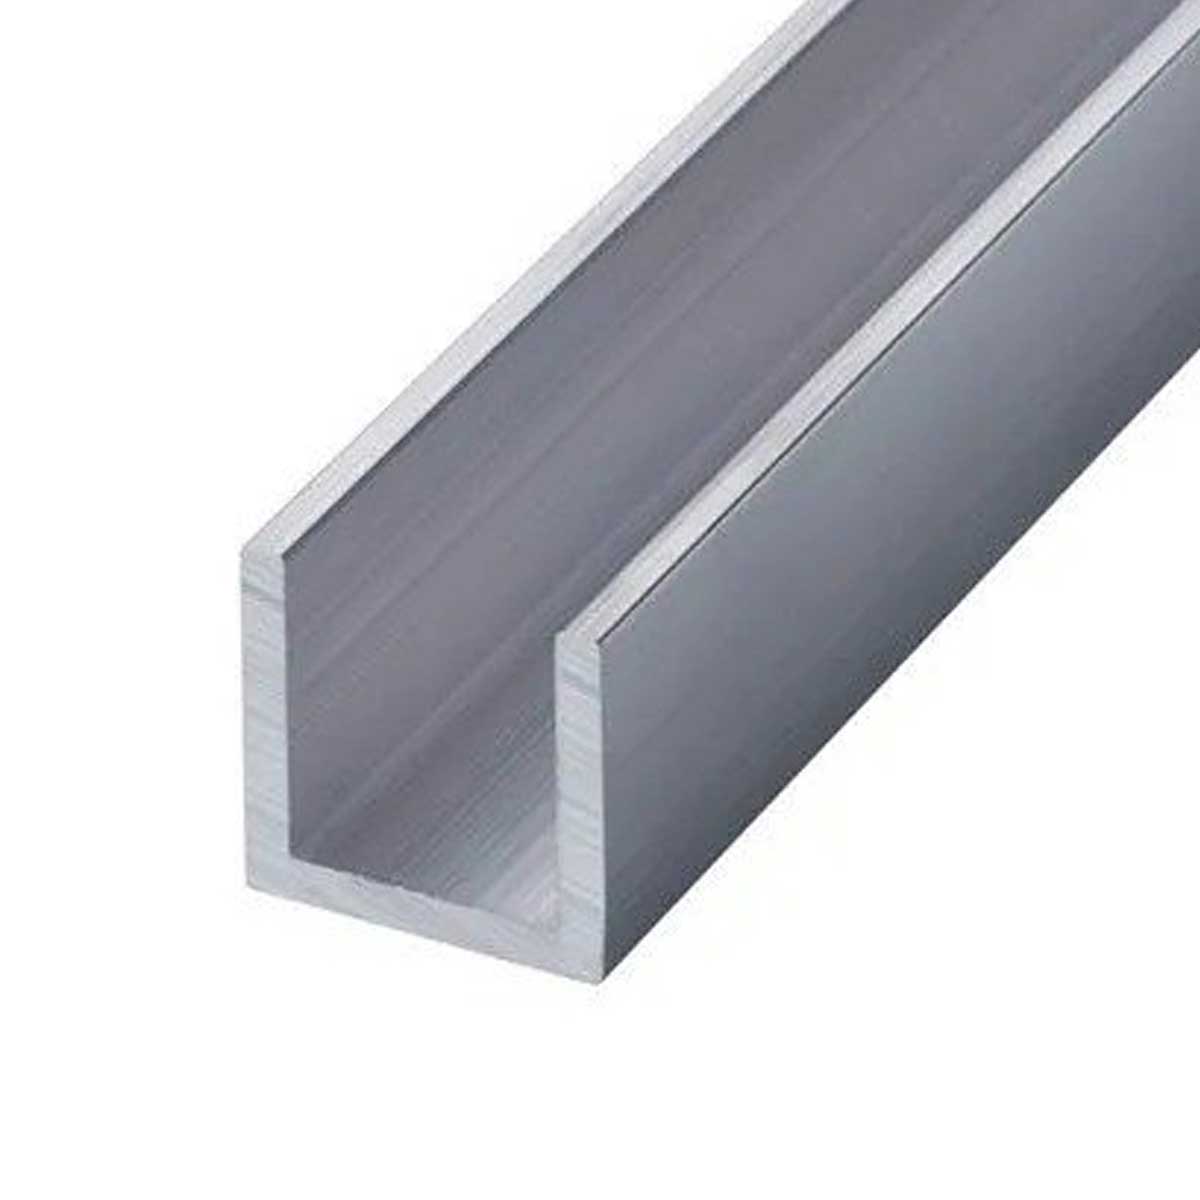 Aluminium C Channel For Construction Manufacturers, Suppliers in Amboli